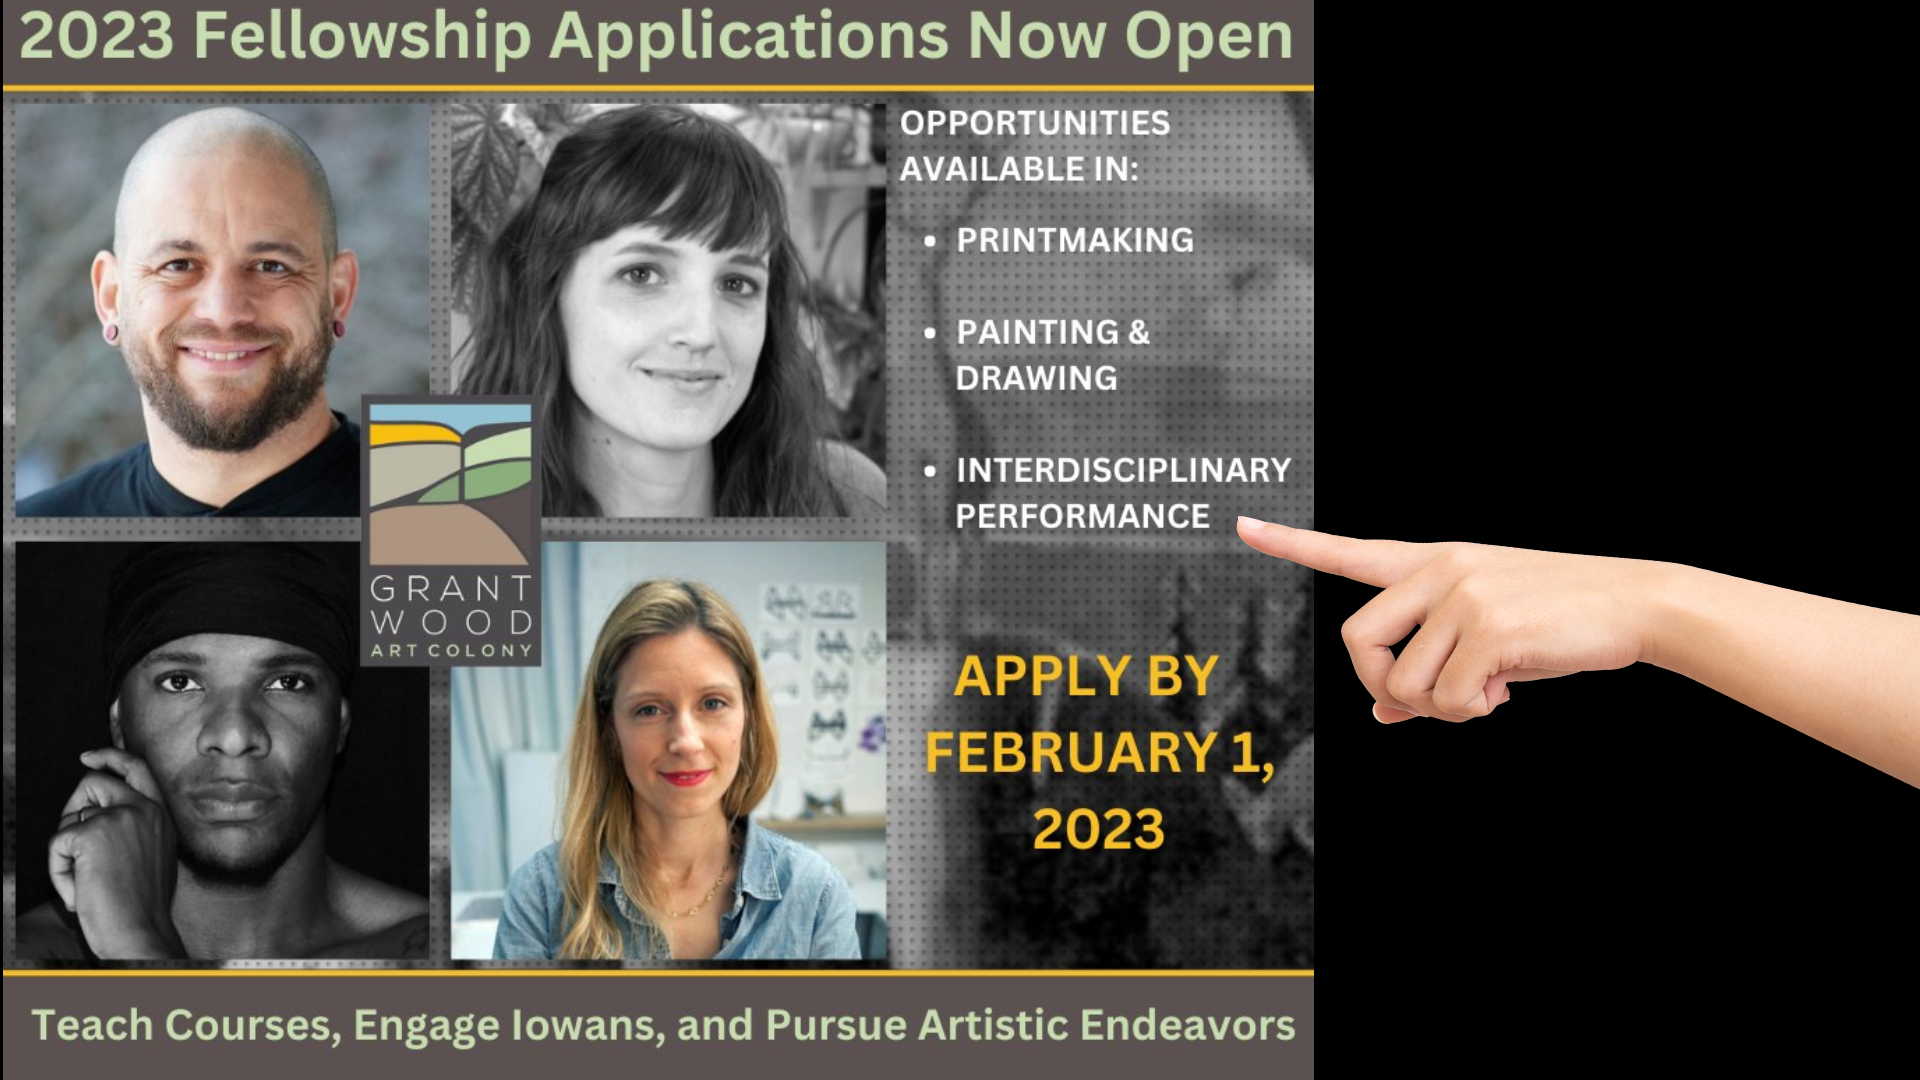 2023 fellowship applications now open for interdisciplinary performance apply by Feb 1 2023